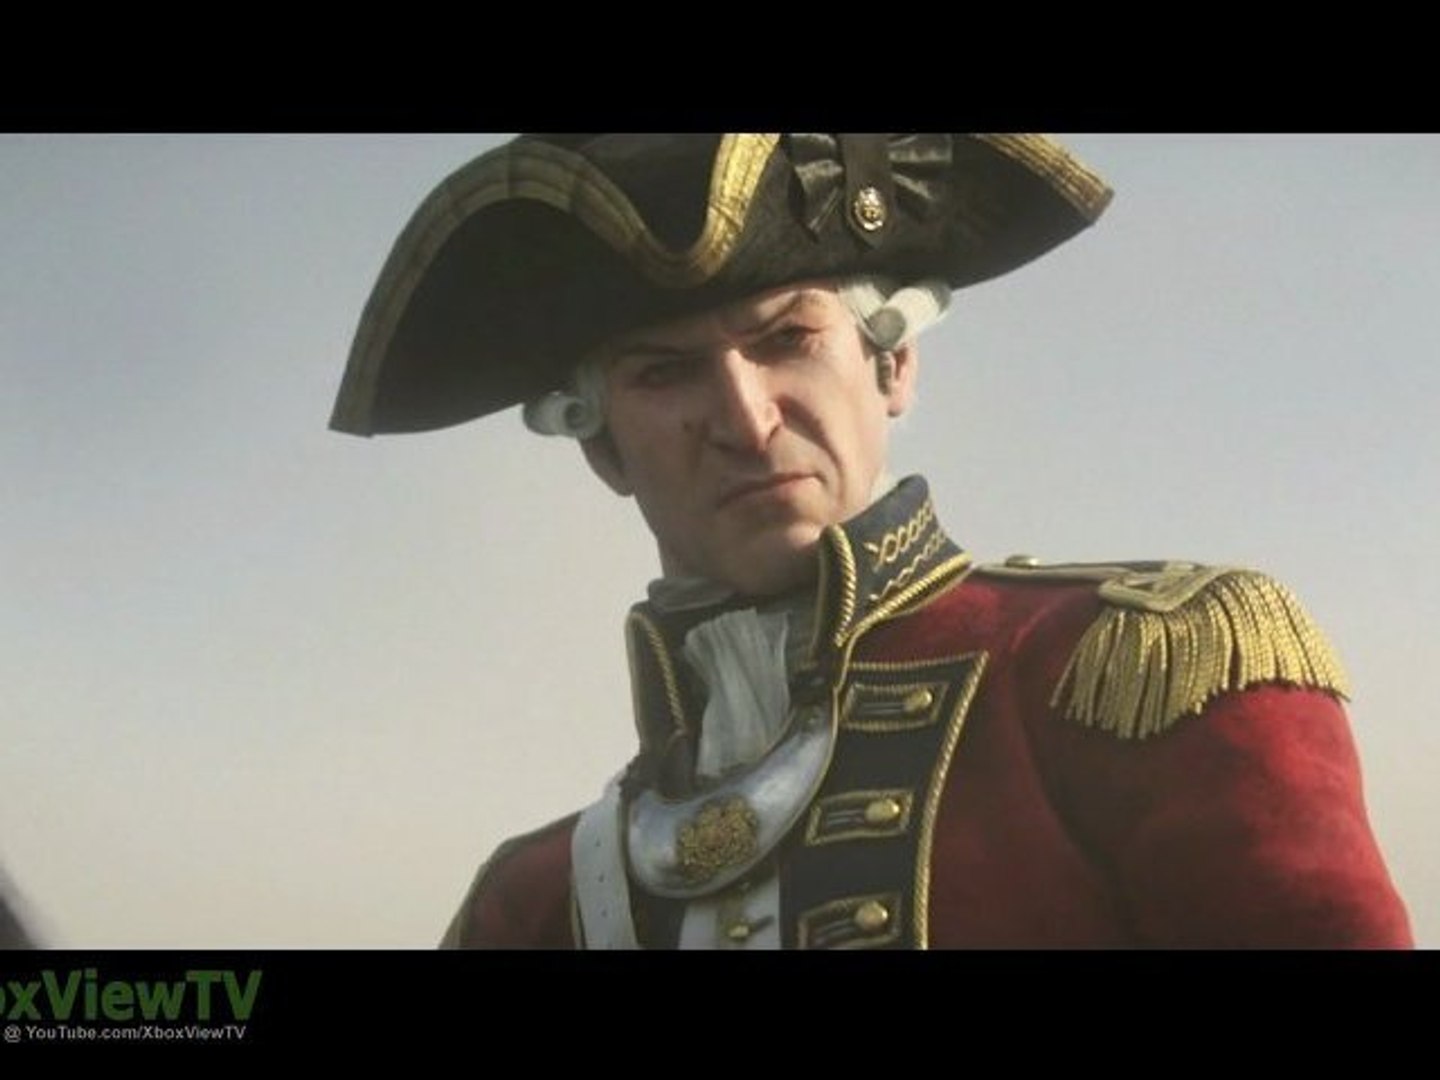 Assassin's Creed 3 - E3 Official Trailer [UK] 